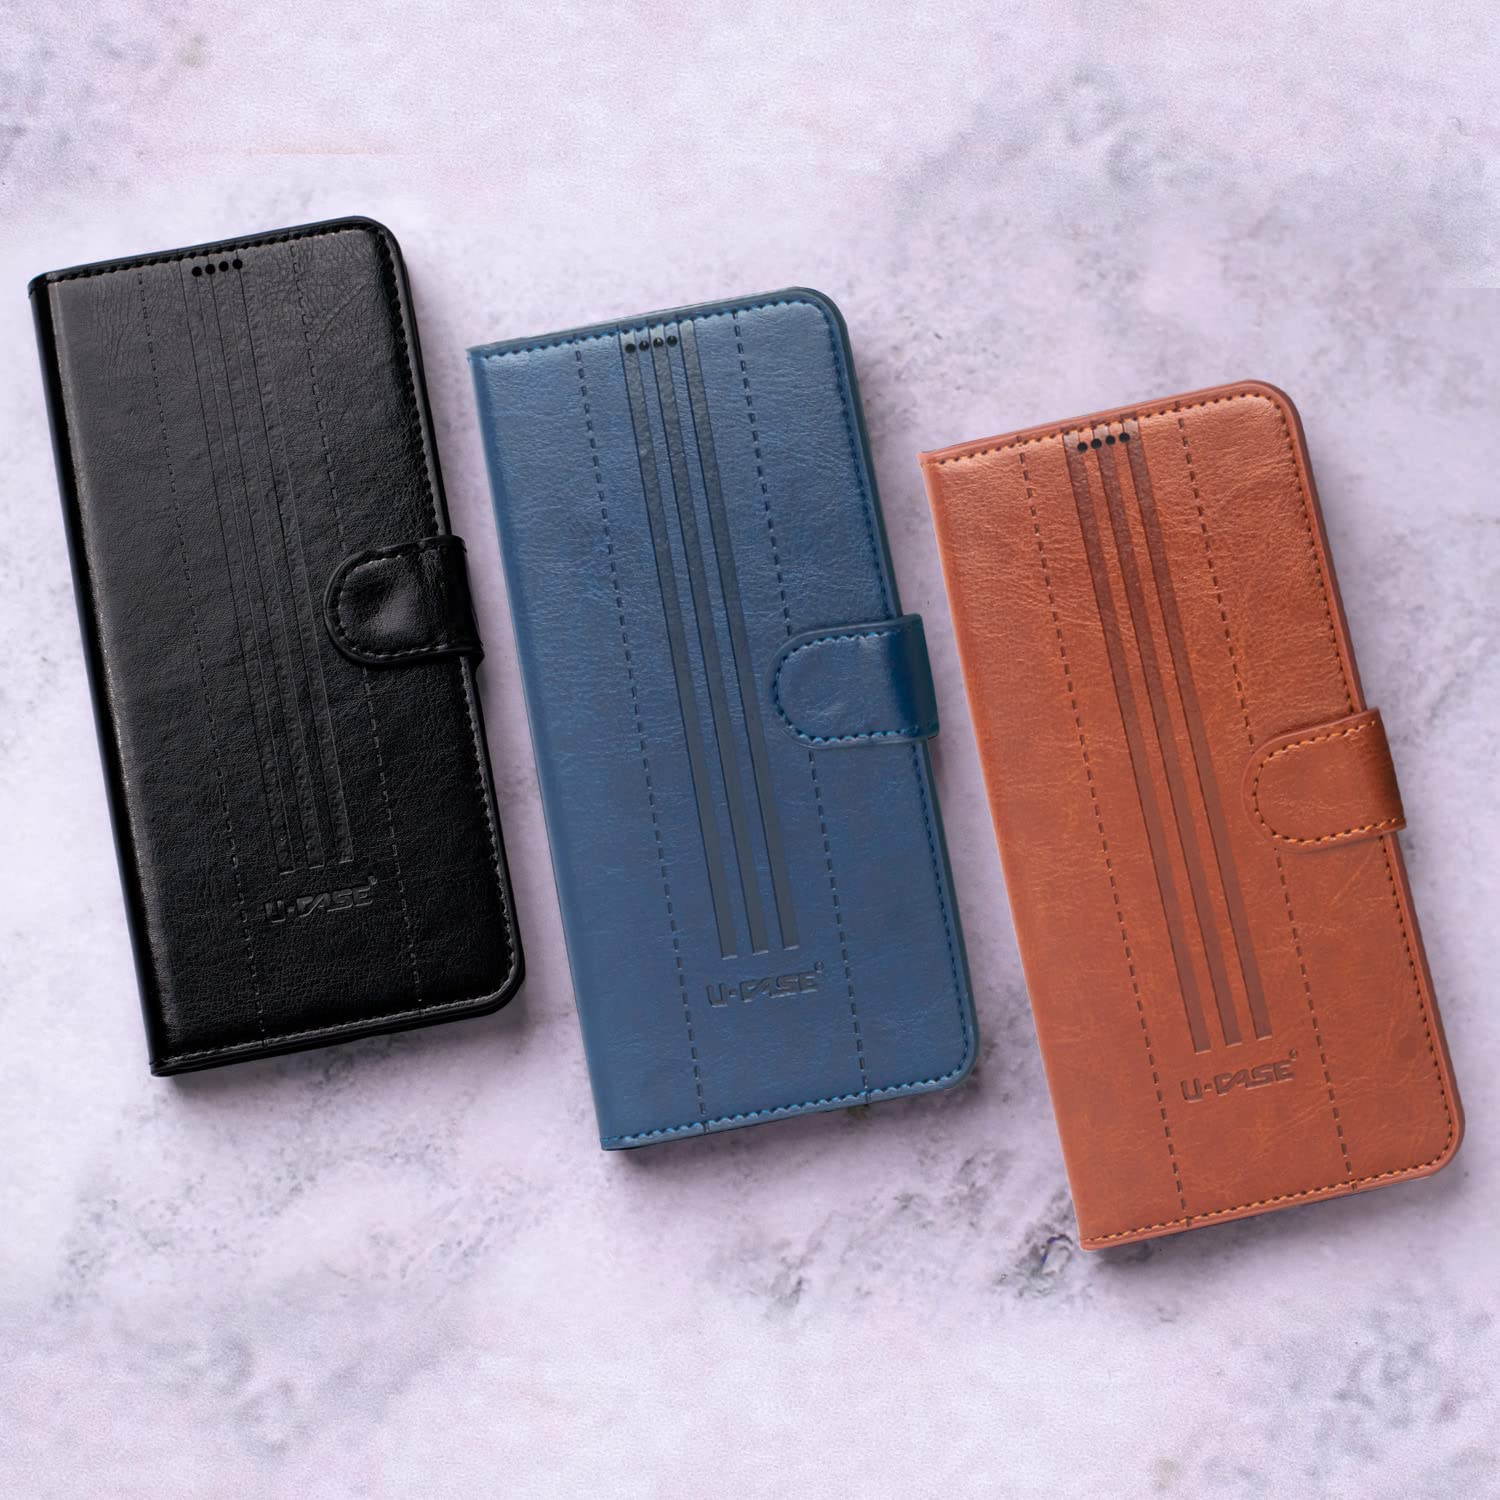 Shop U-CASE Flip Cover for Oppo A77s Vegan Foldable Stand & Pocket Magnetic Closure colors